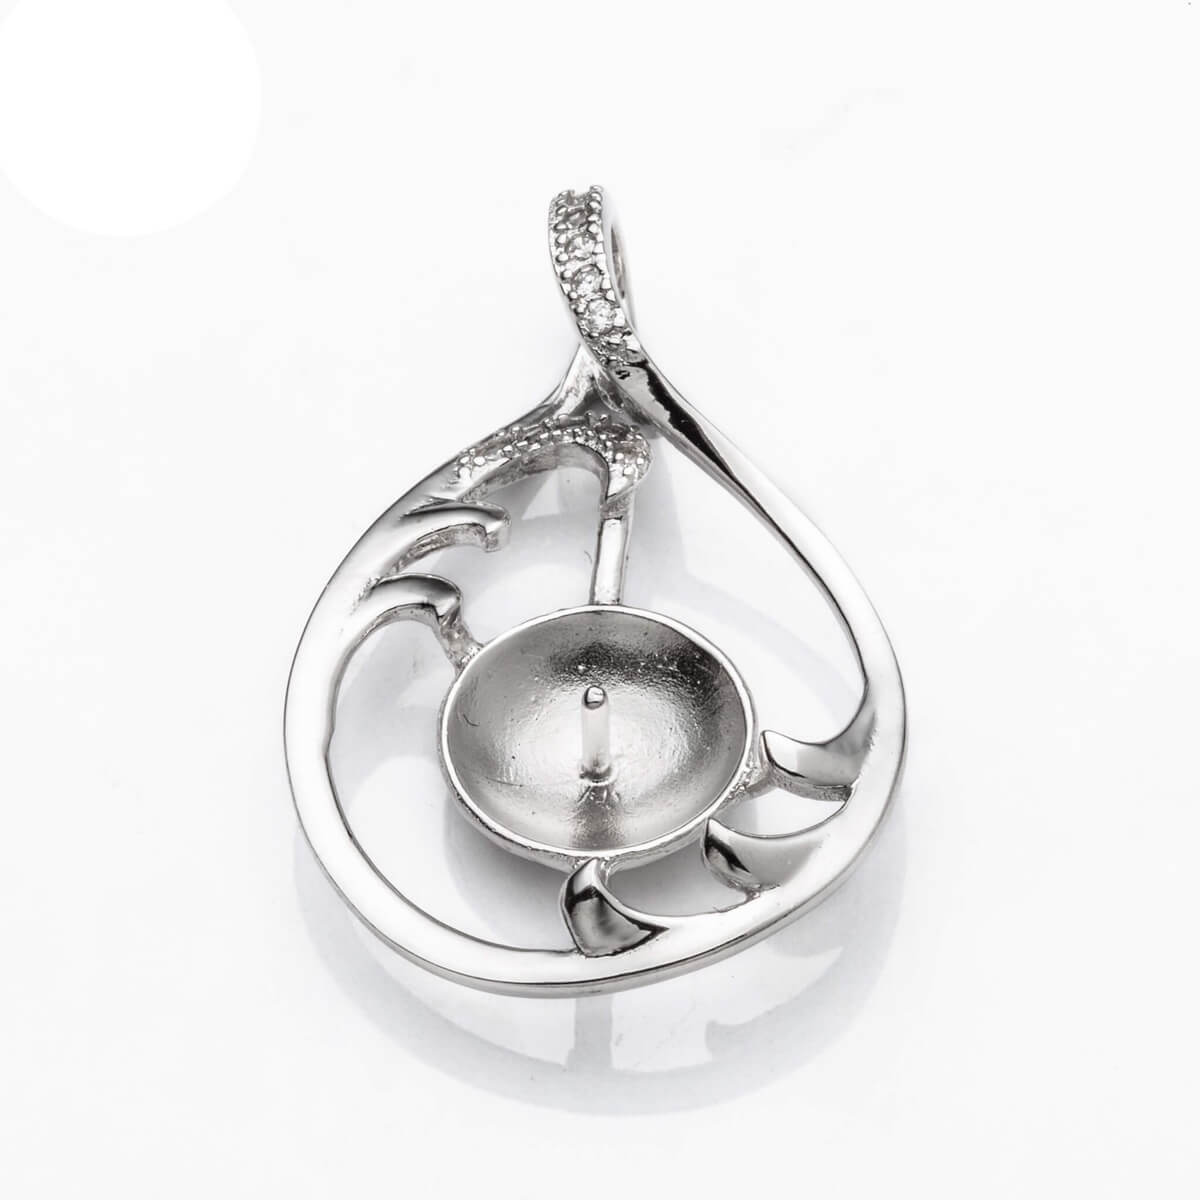 Pendant with Cubic Zirconia Inlays and Cup and Peg Mounting in Sterling Silver 9mm 